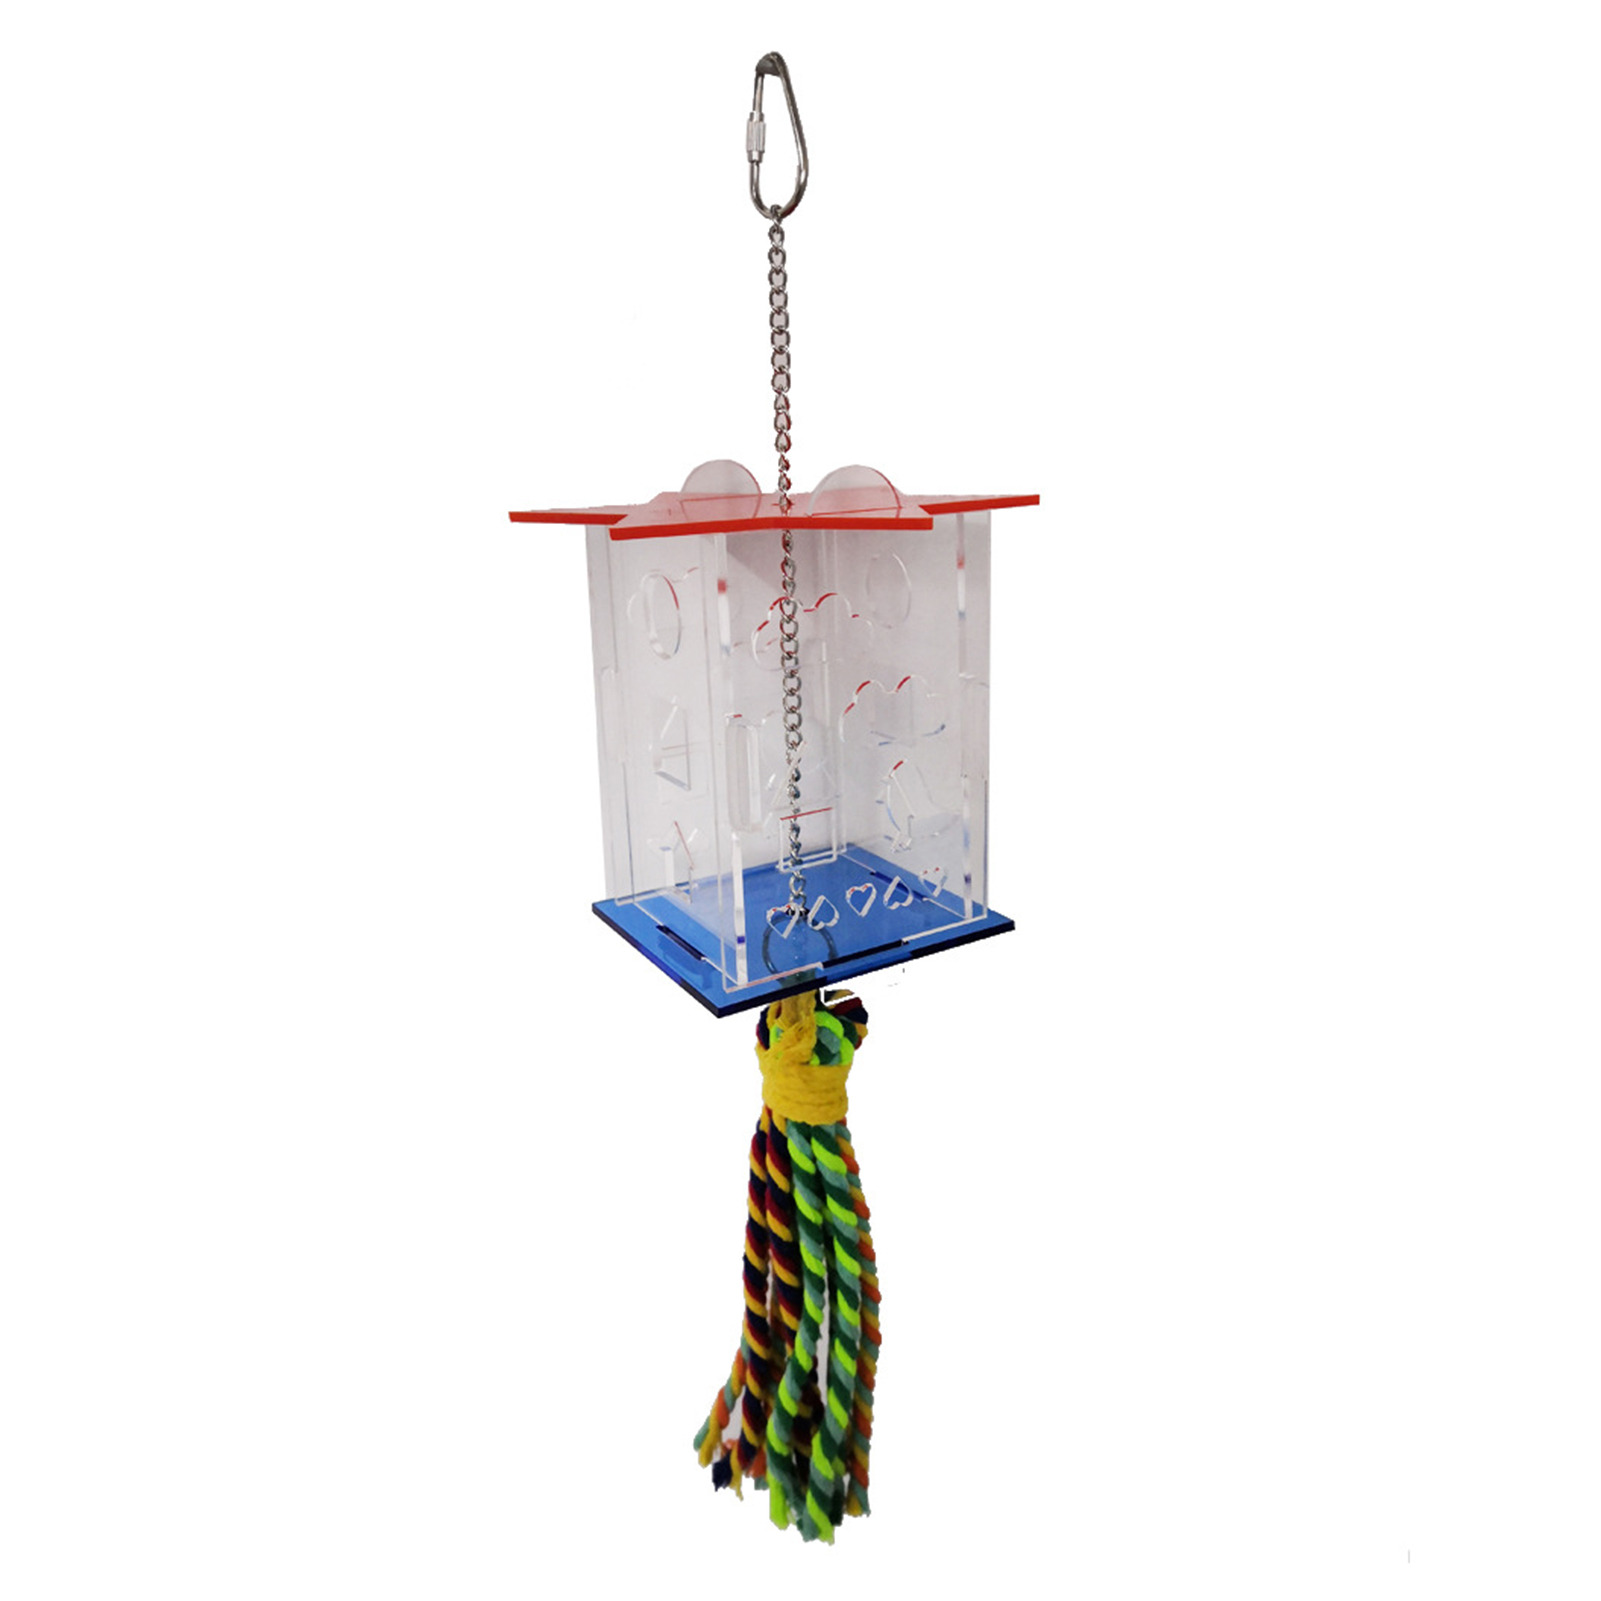 Ggdoo Parrot Feeder Toy Hanging Foraging Ball Chicken Foraging Toy Plastic Pet Feeding Ball for Bird Hens Parrot Forager